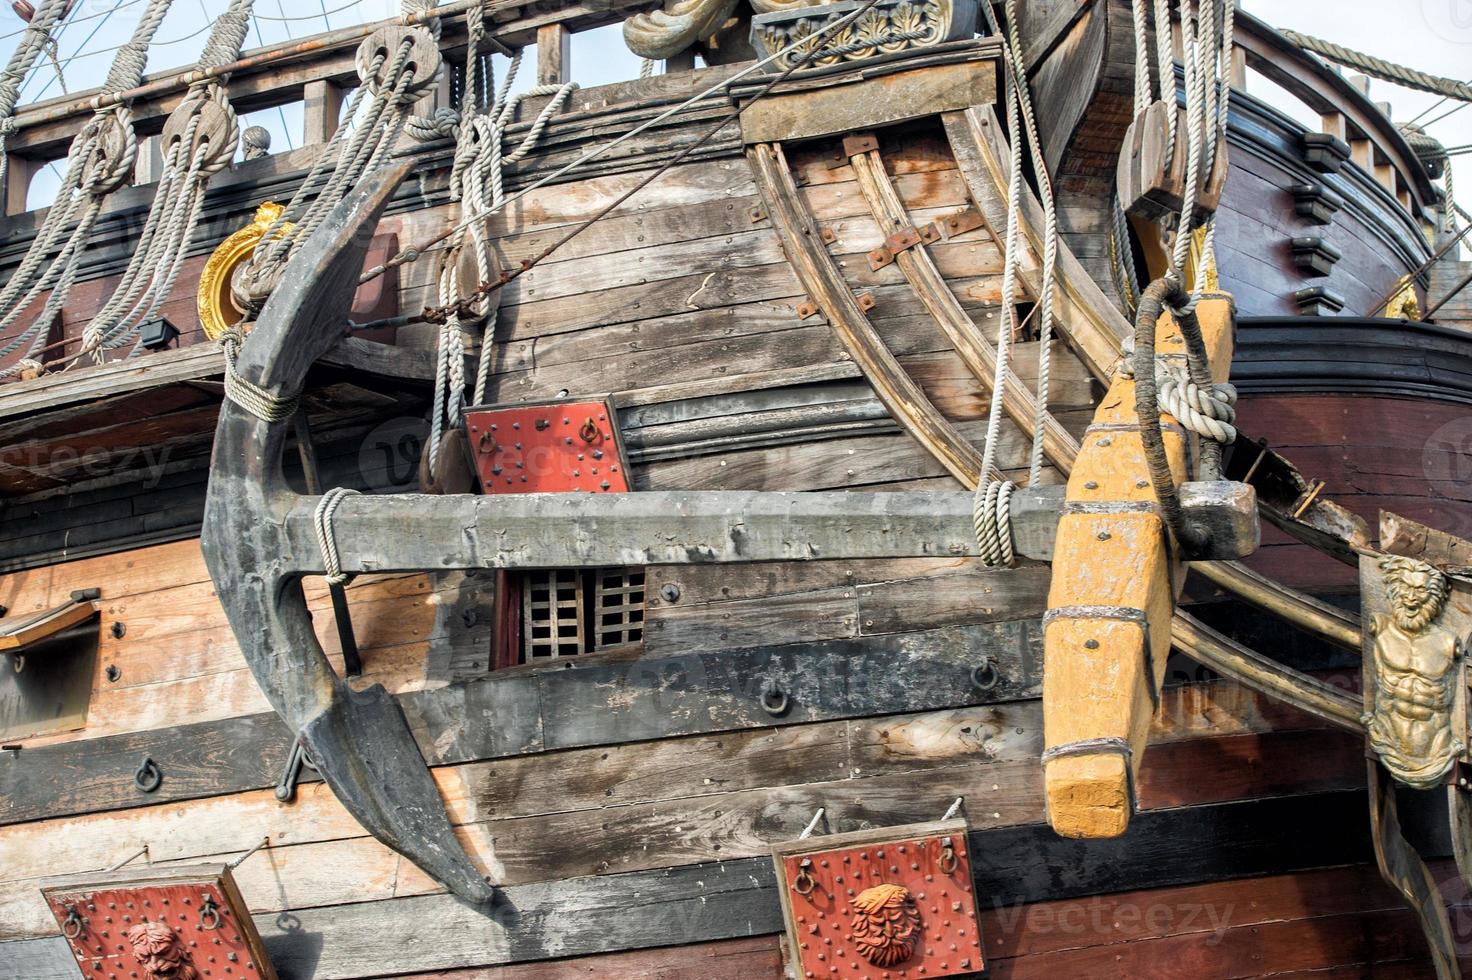 detail of a pirate vessel photo